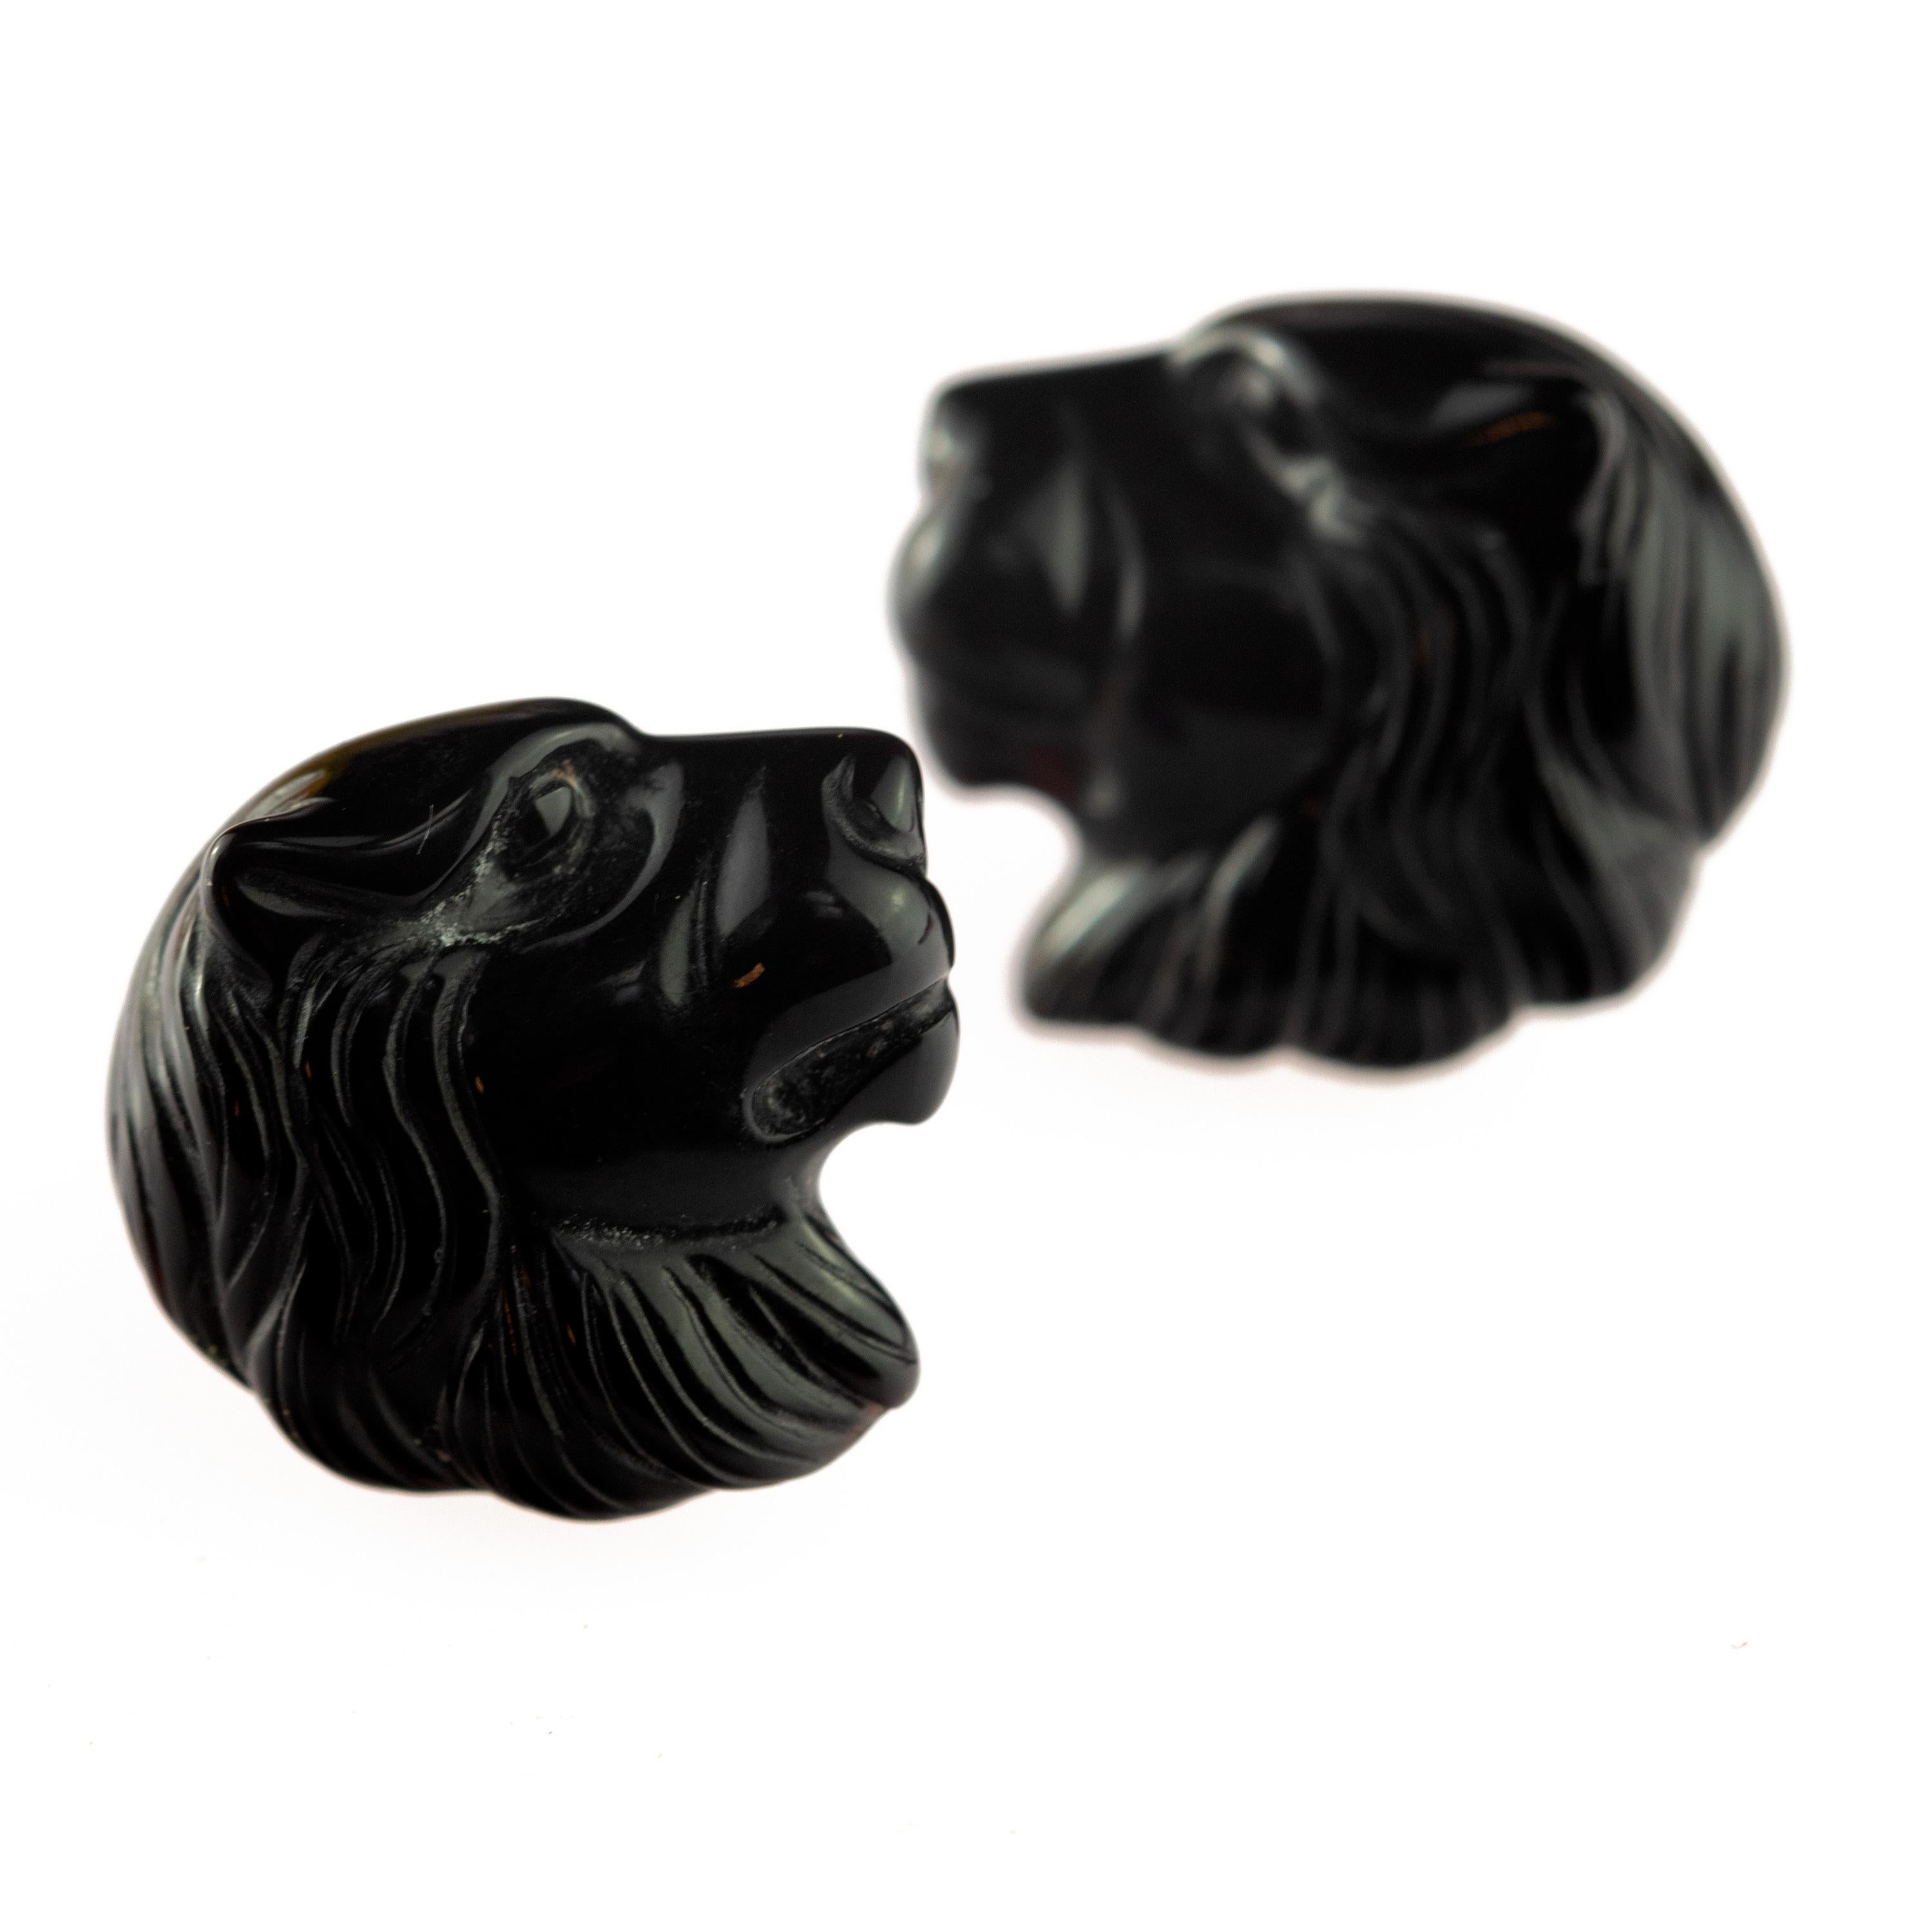 Stunning black agate stud earrings. Modern carved lion head design that evokes the italian handmade traditional jewelry work, wrapping itself in a strong look enriched with Gold Plate manifesting glamour and exquisite taste.

Inspired by the lion